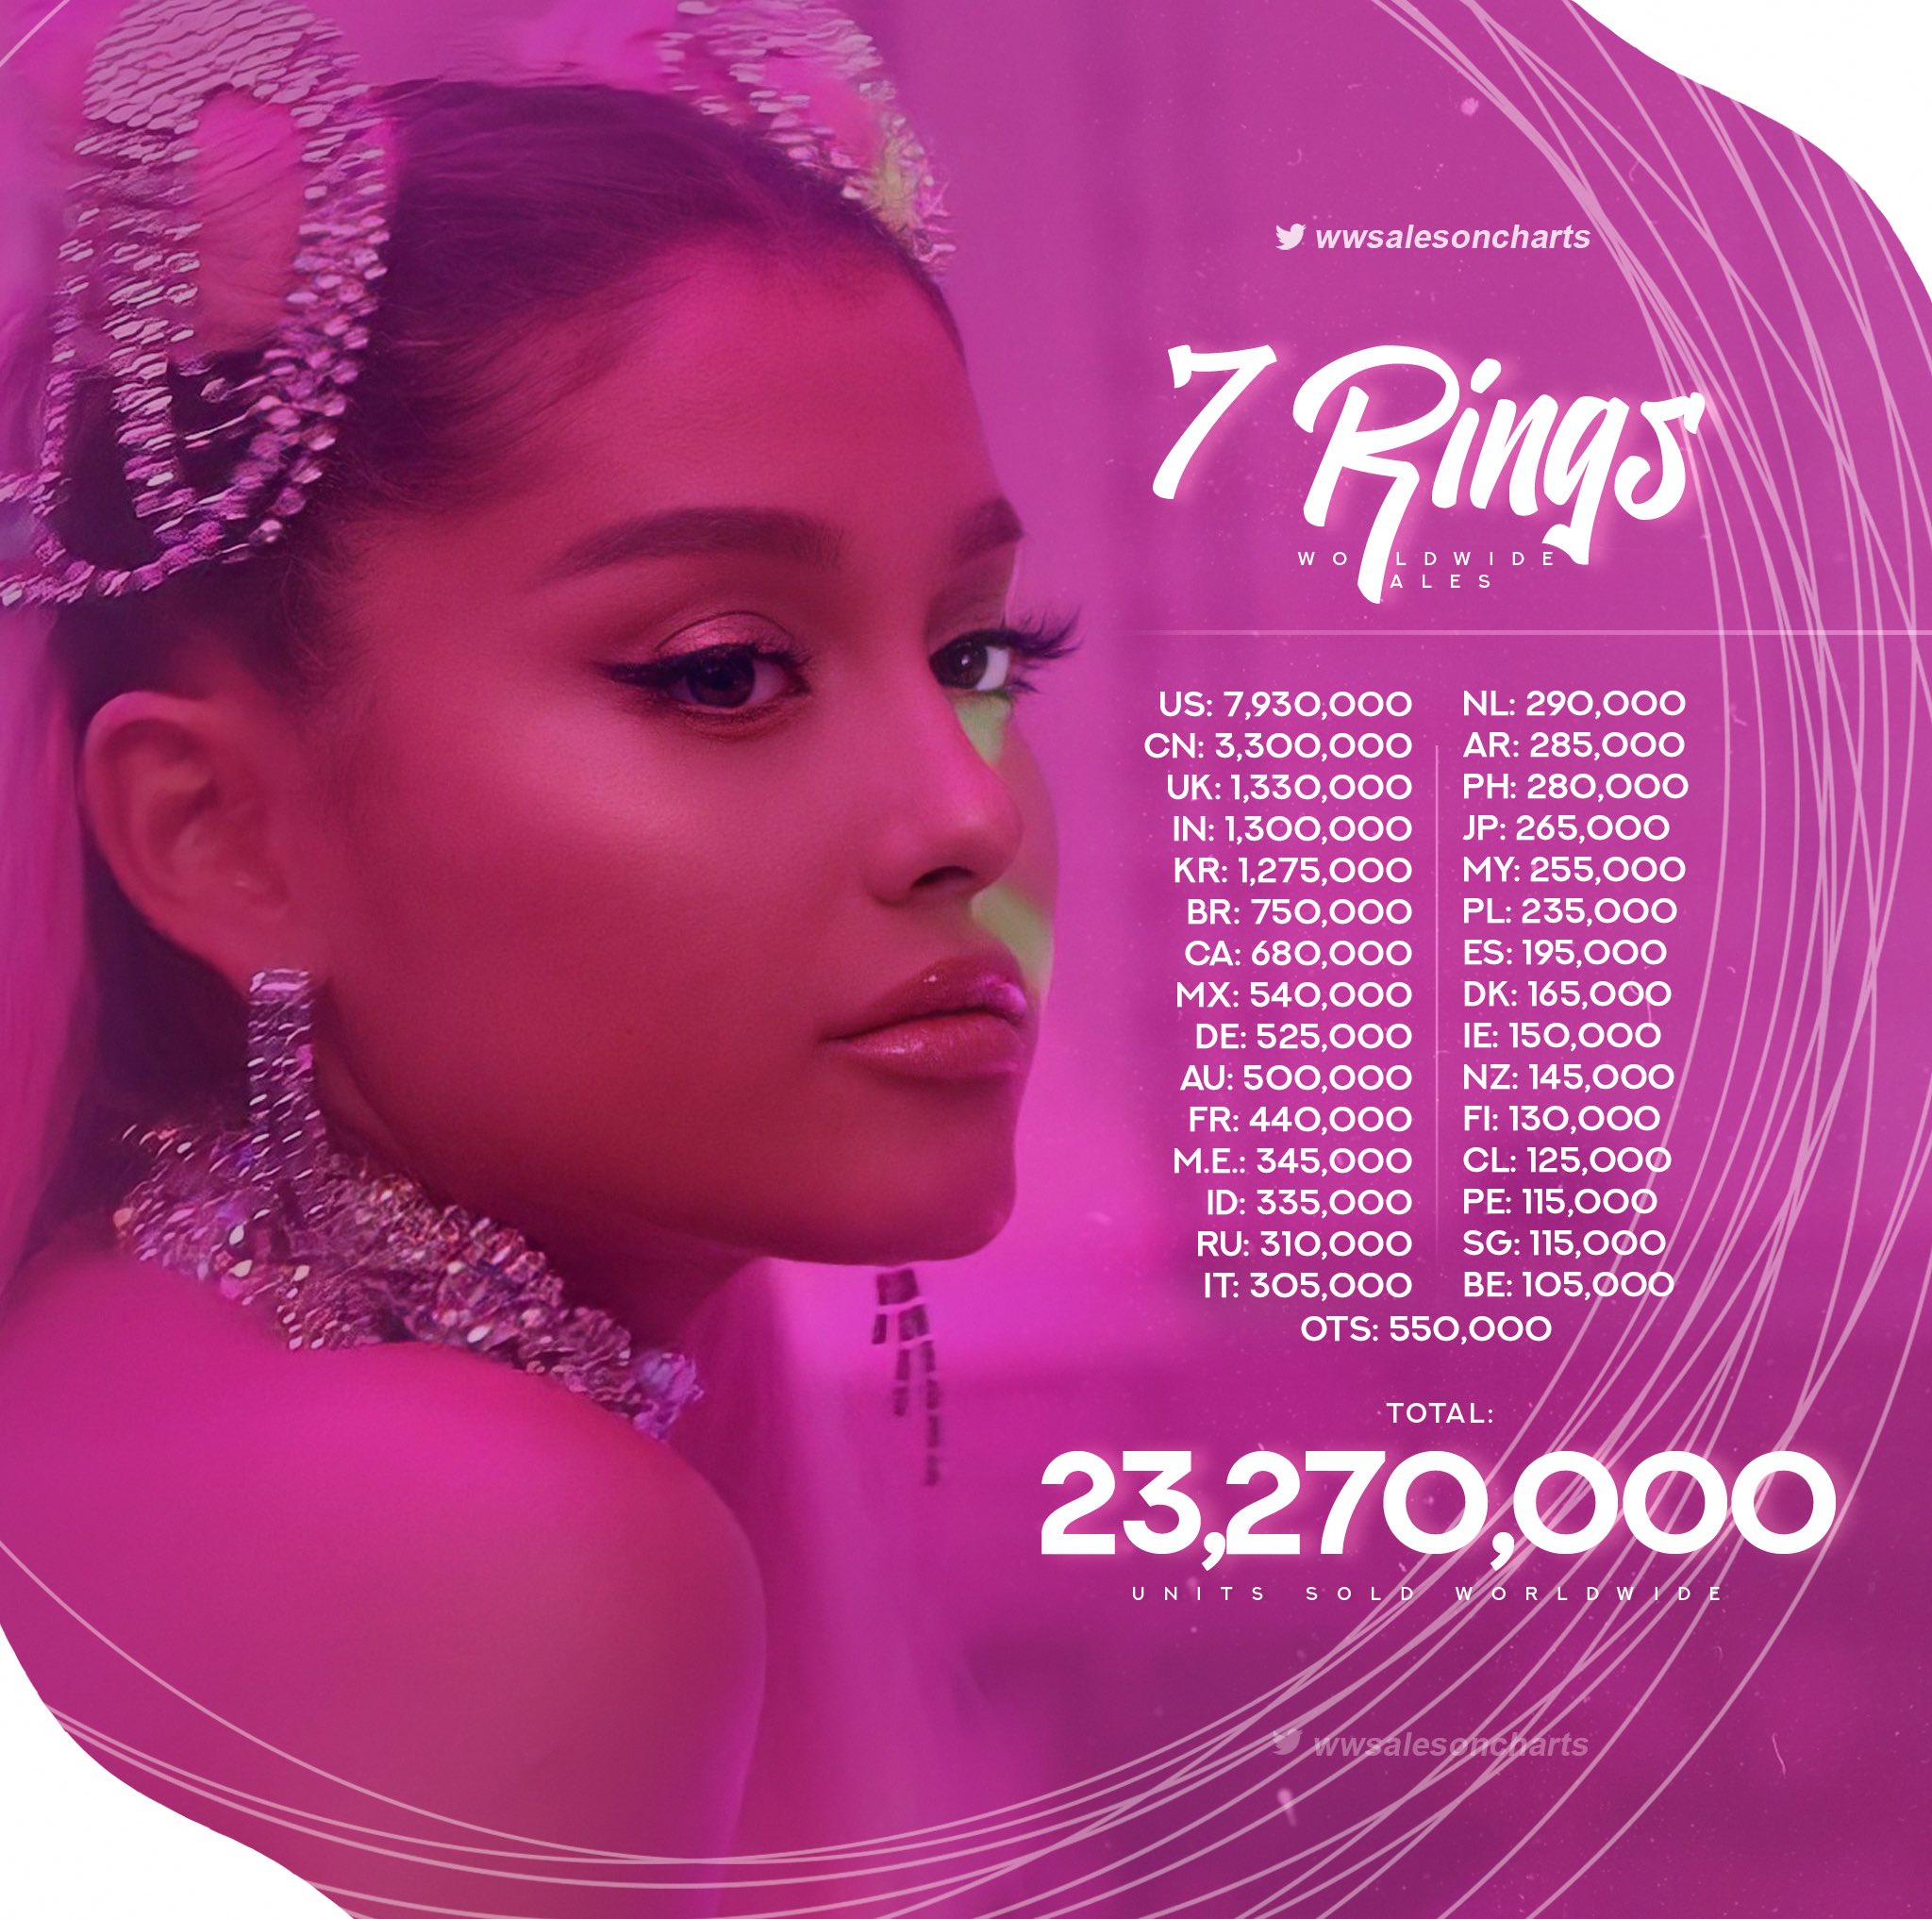 Here's Why Ariana Grande Signed Away 90% of Her '7 Rings' Royalties